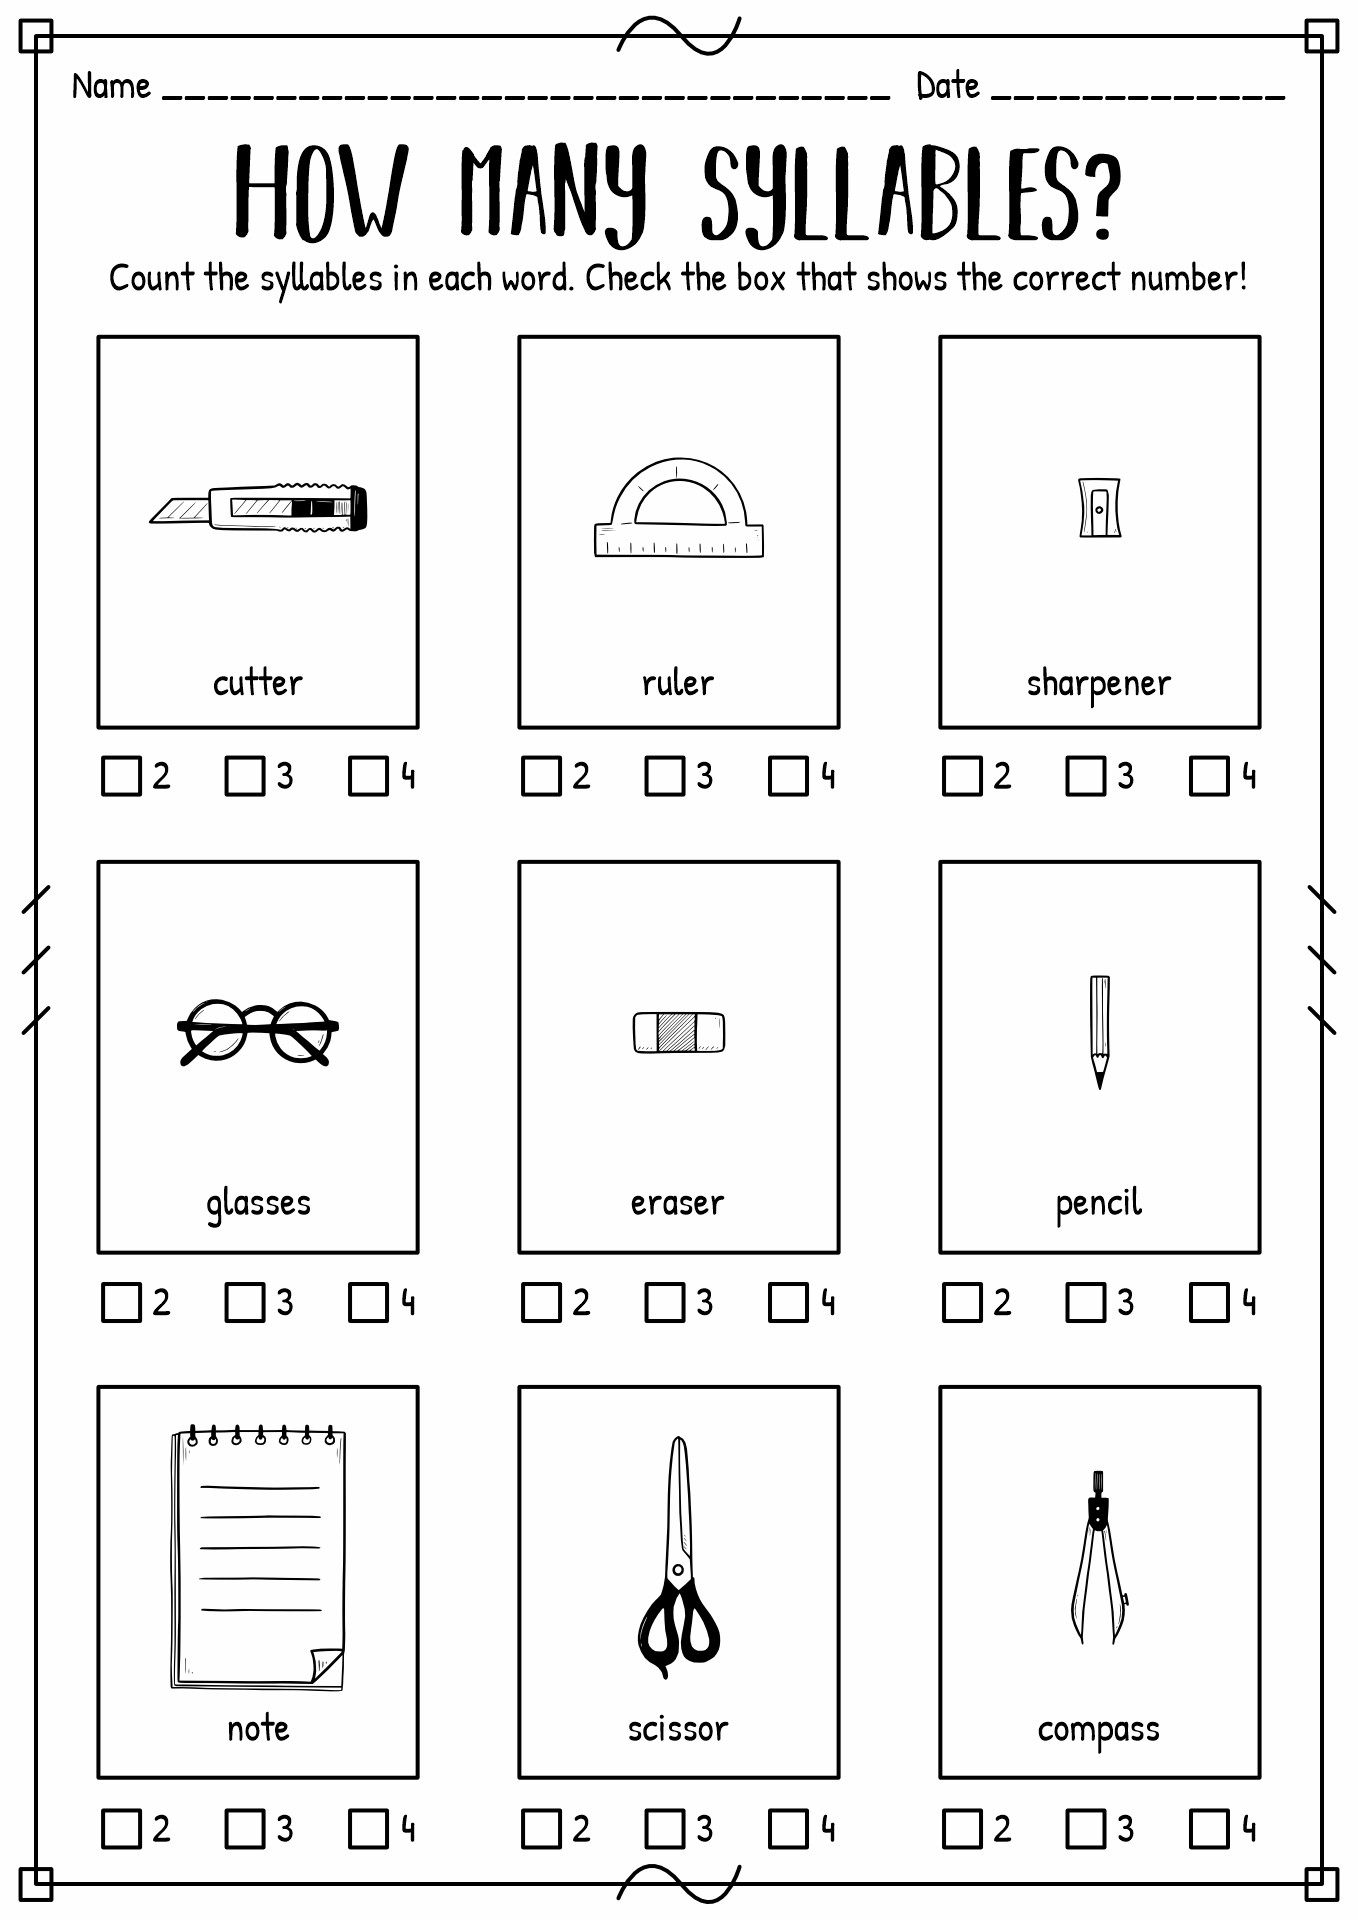 free-printable-syllable-worksheets-printable-word-searches